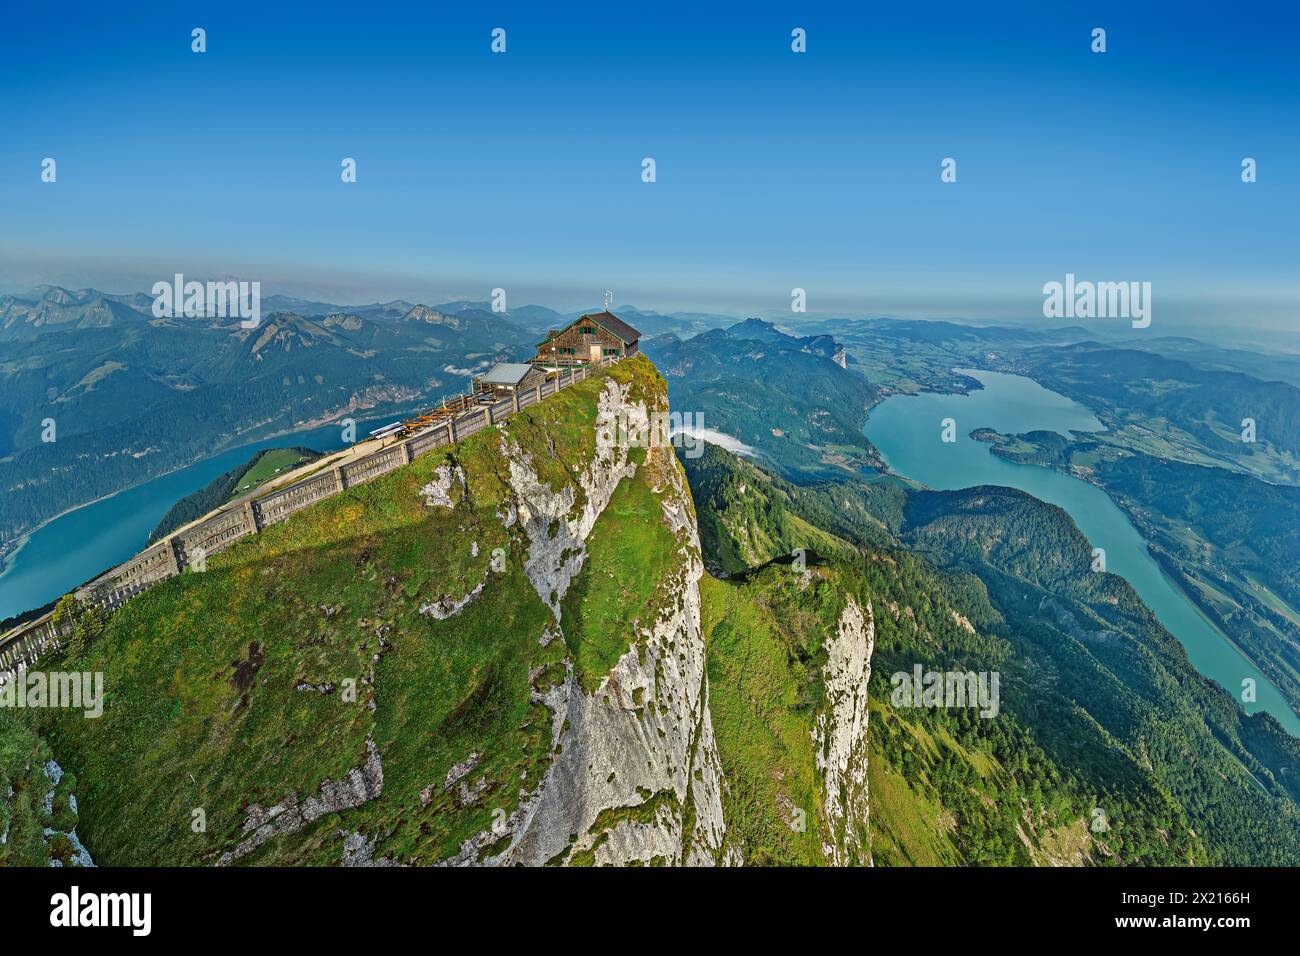 Himmelspfortenhütte on Schafberg with Wolfgangsee and Mondsee in the background, Himmelspforte, Schafberg, Salzkammergut Mountains, Salzkammergut, Upp Stock Photo